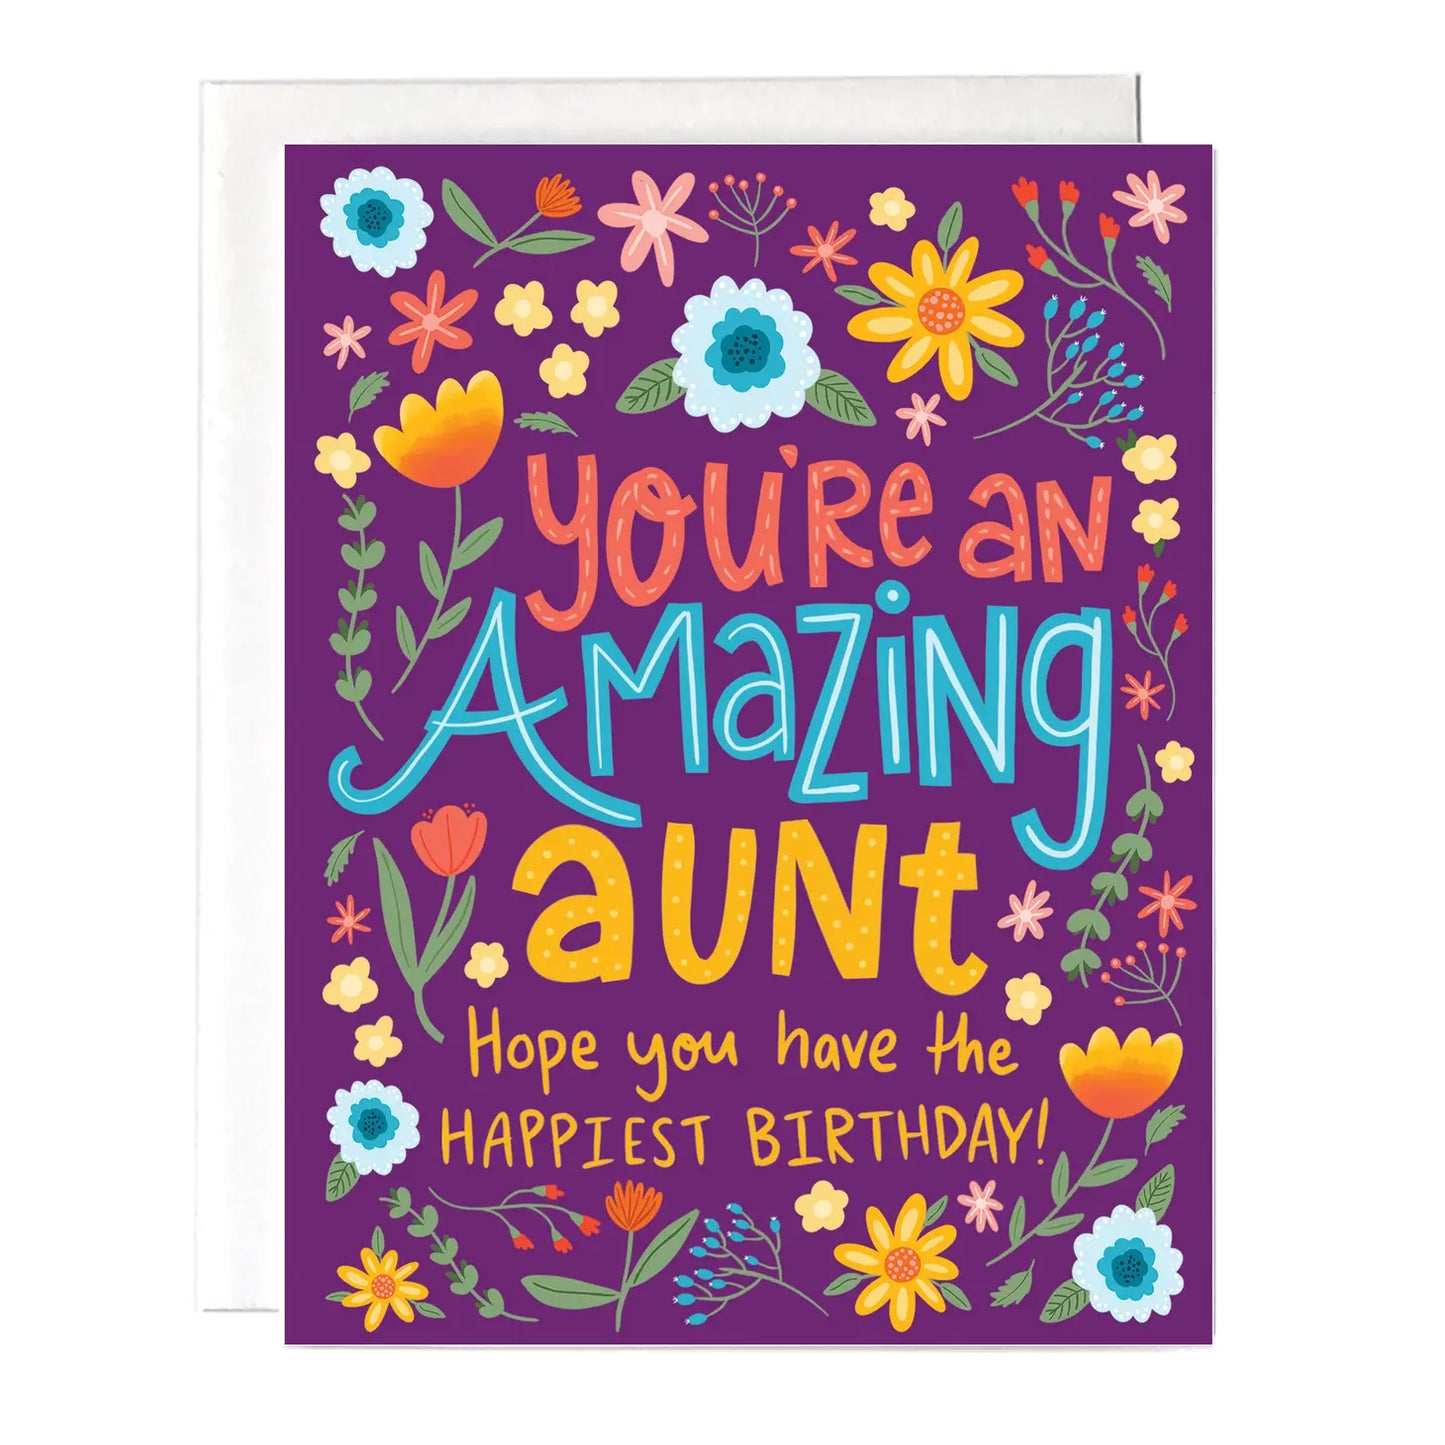 "You're An Amazing Aunt" Greeting Card